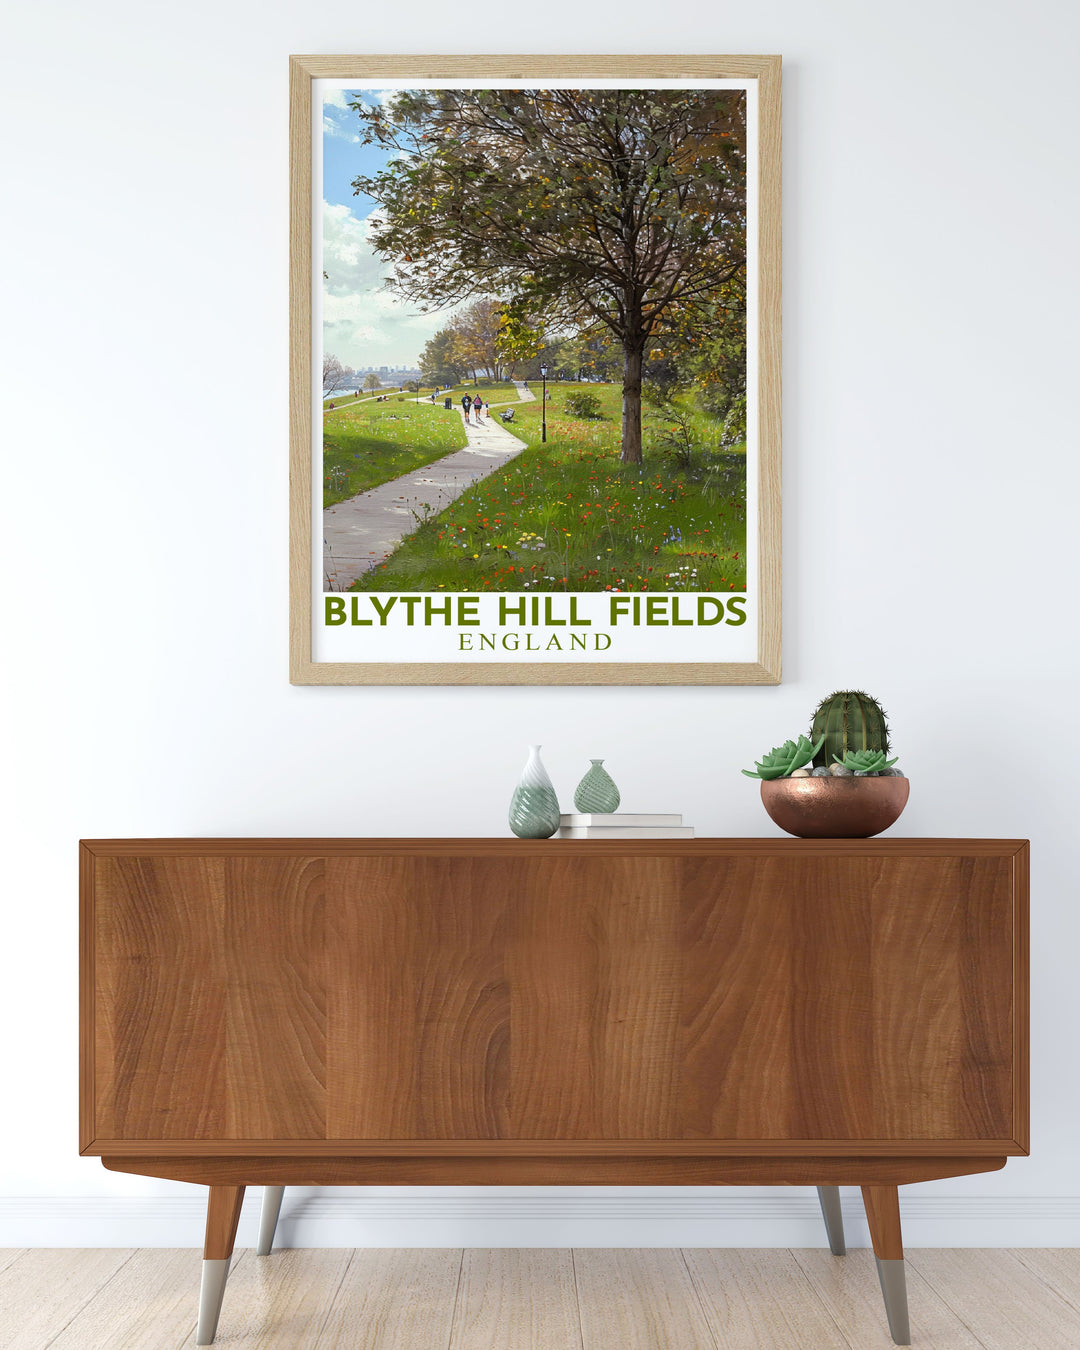 Blythe Hill Fields expansive green spaces and the peaceful walkways are beautifully depicted in this art print, making it a versatile piece for any home decor.